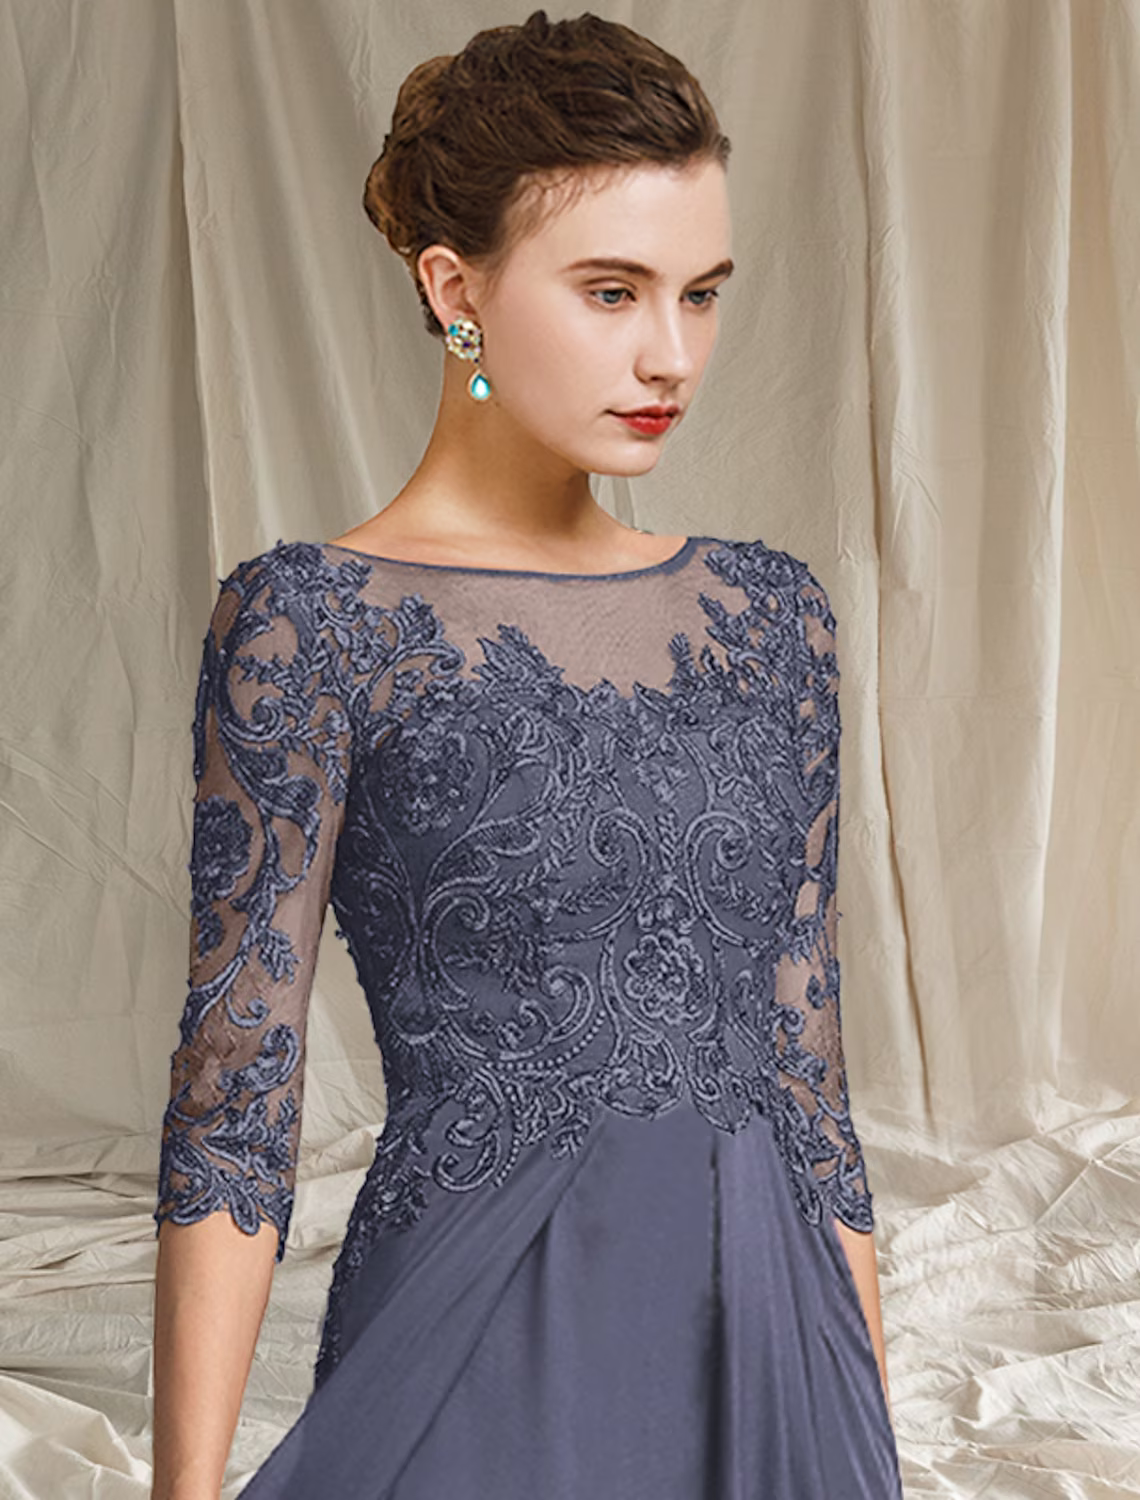 A-Line Mother of the Bride Dress Elegant Floor Length Chiffon Lace Half Sleeve with Pleats